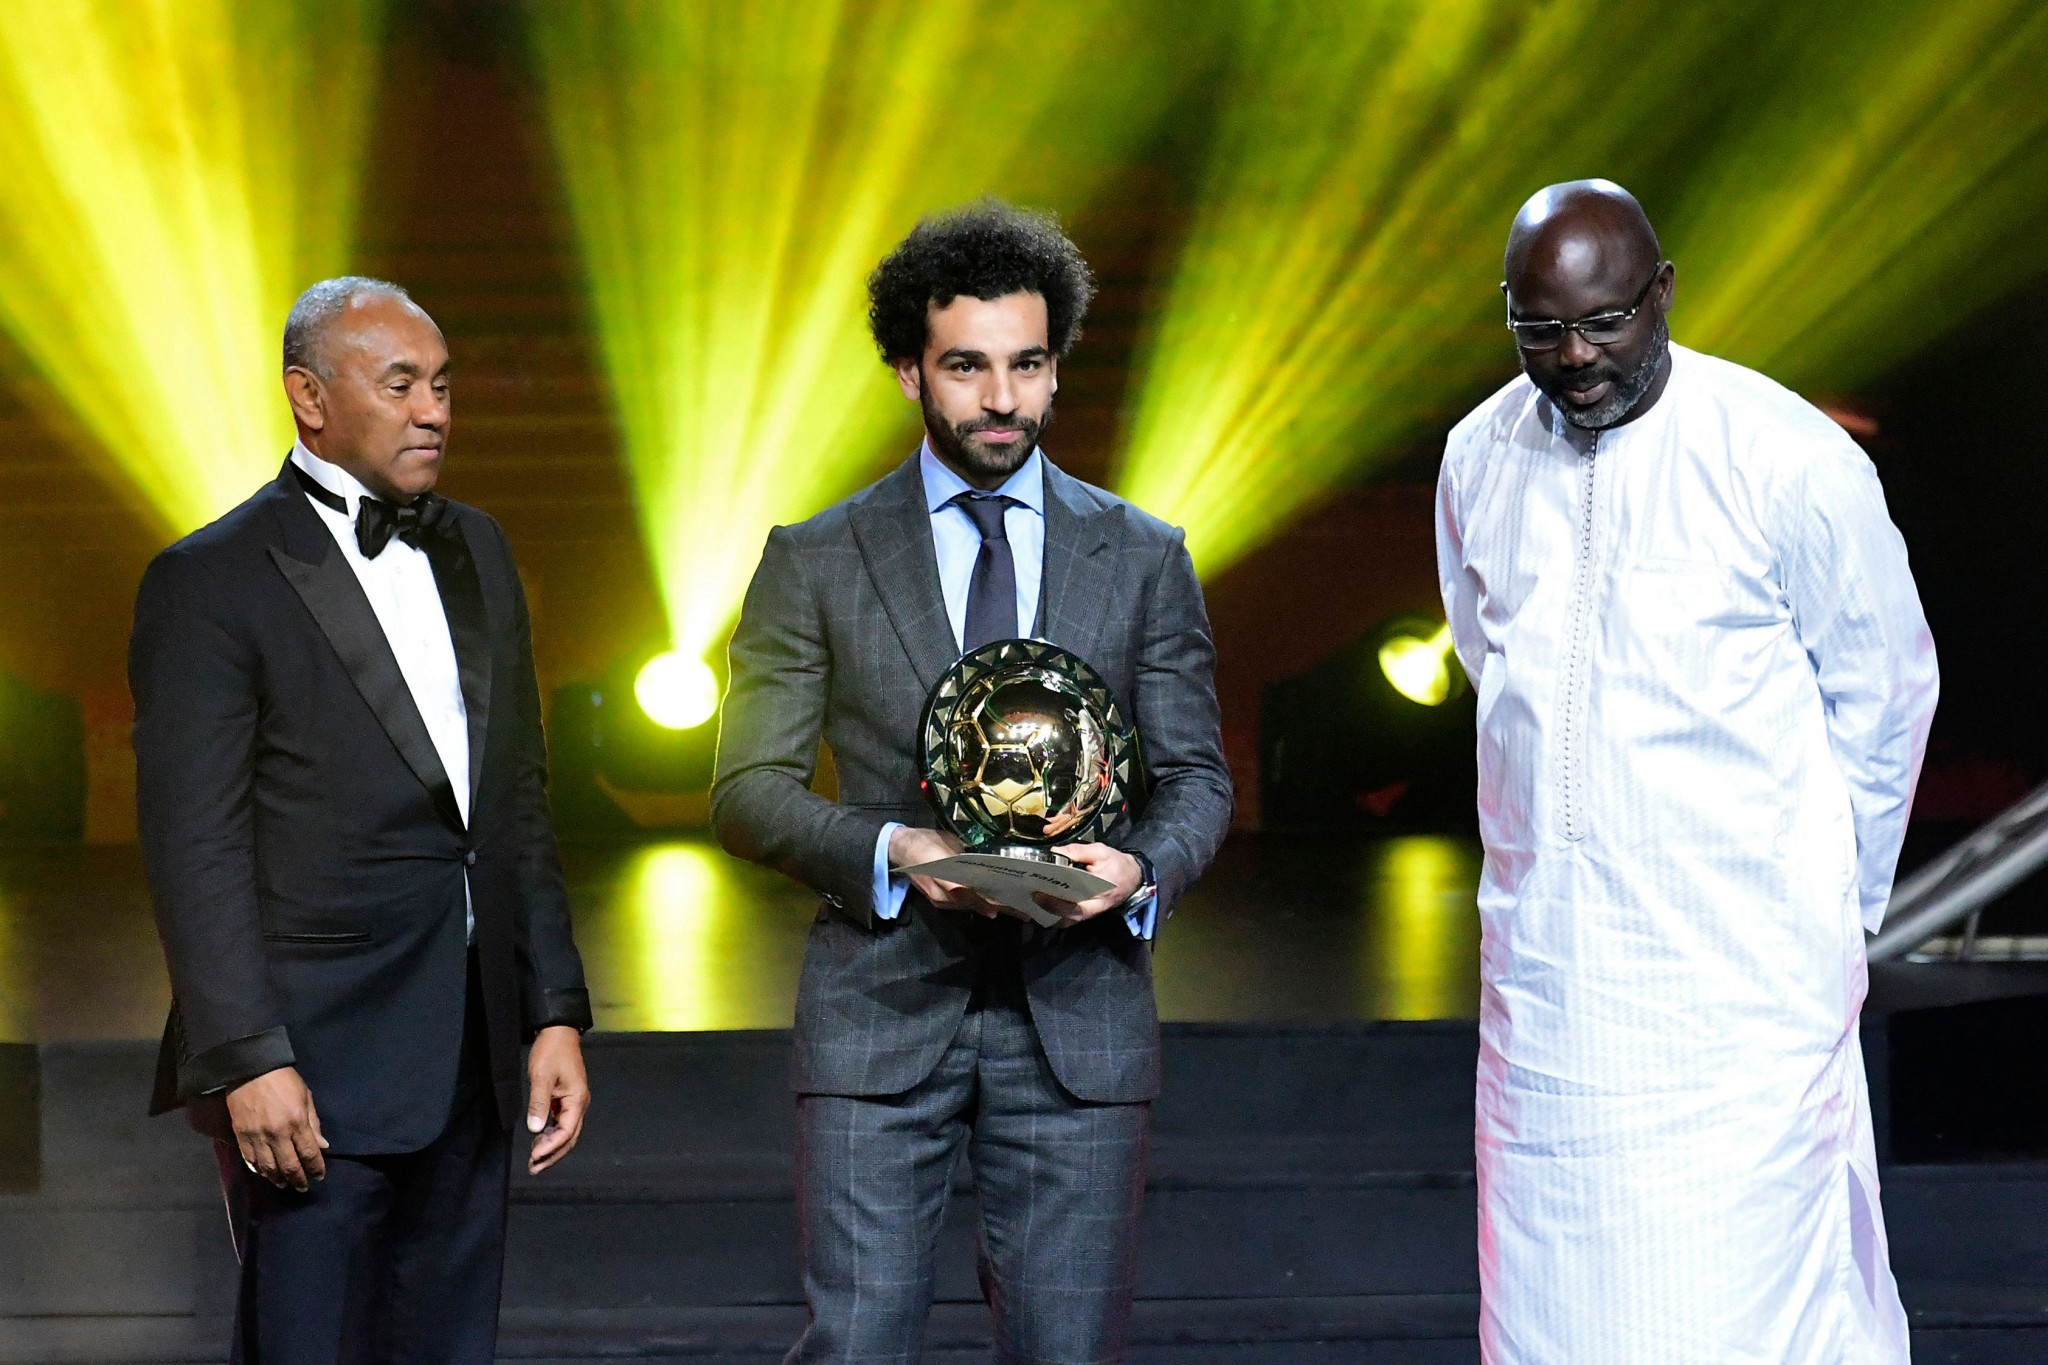 Liverpool forward Salah named African Footballer of the Year for second year running